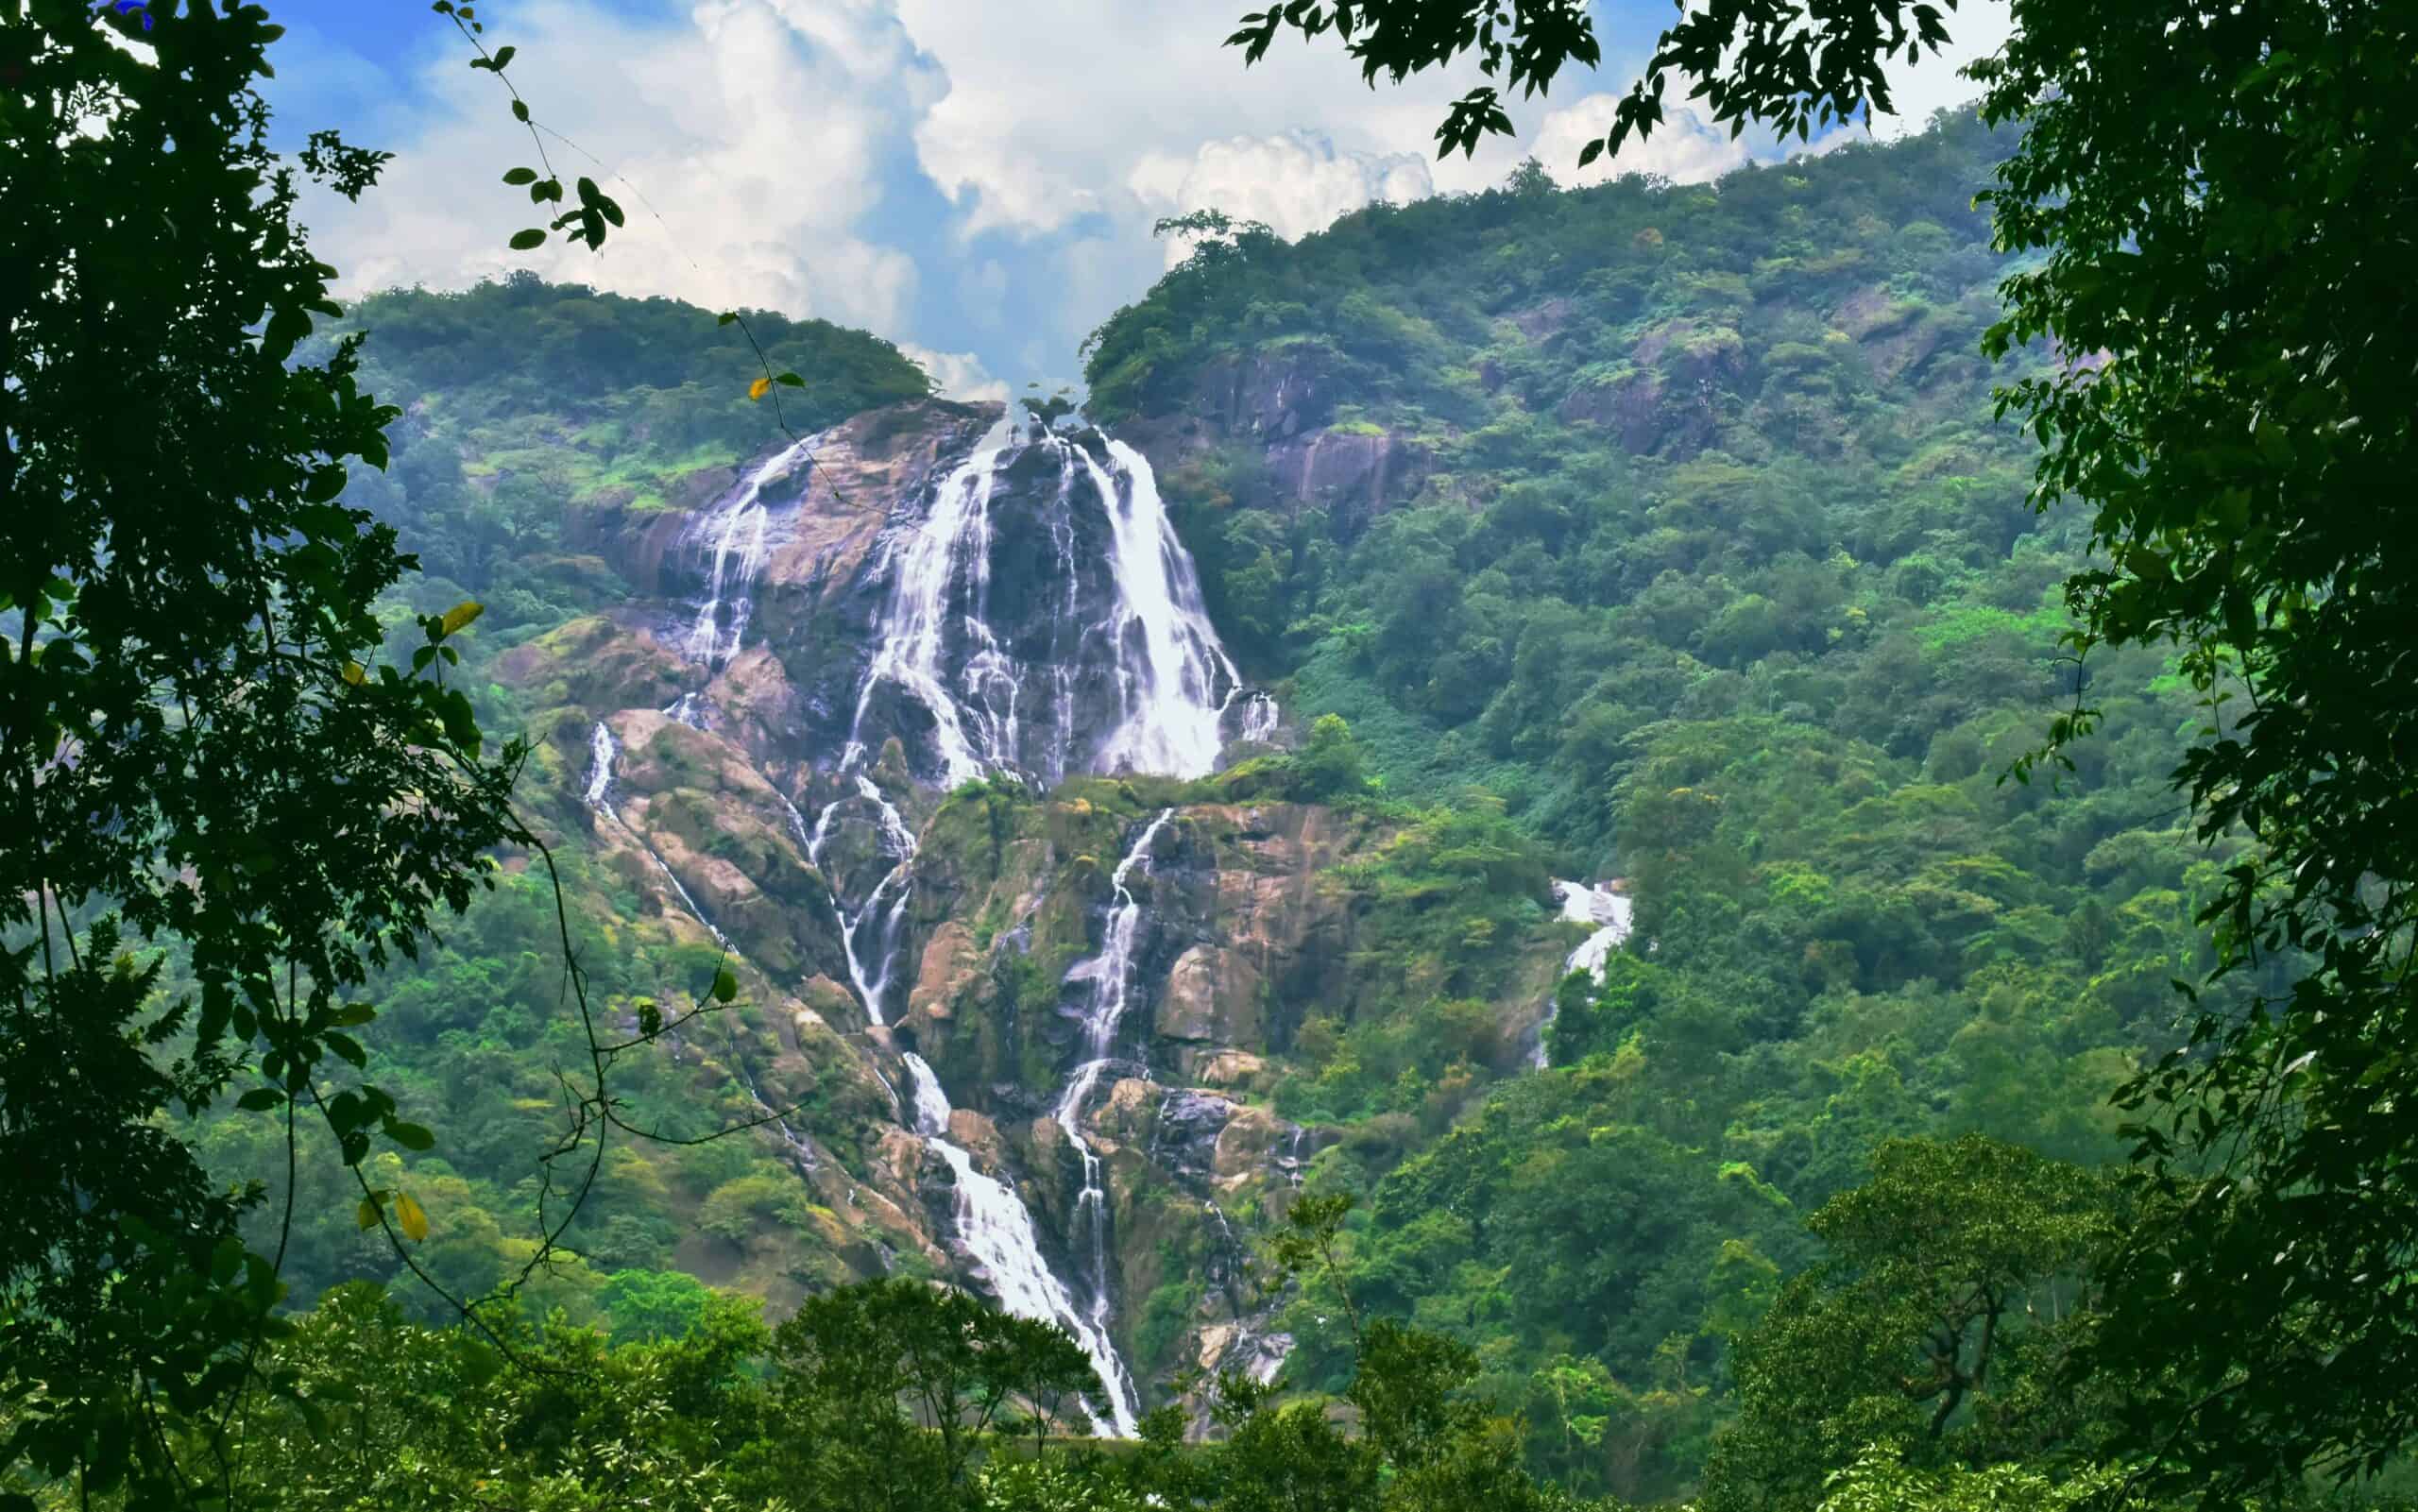 milky, white sea cascades down the mountain of this unique and stunning waterfall in India.